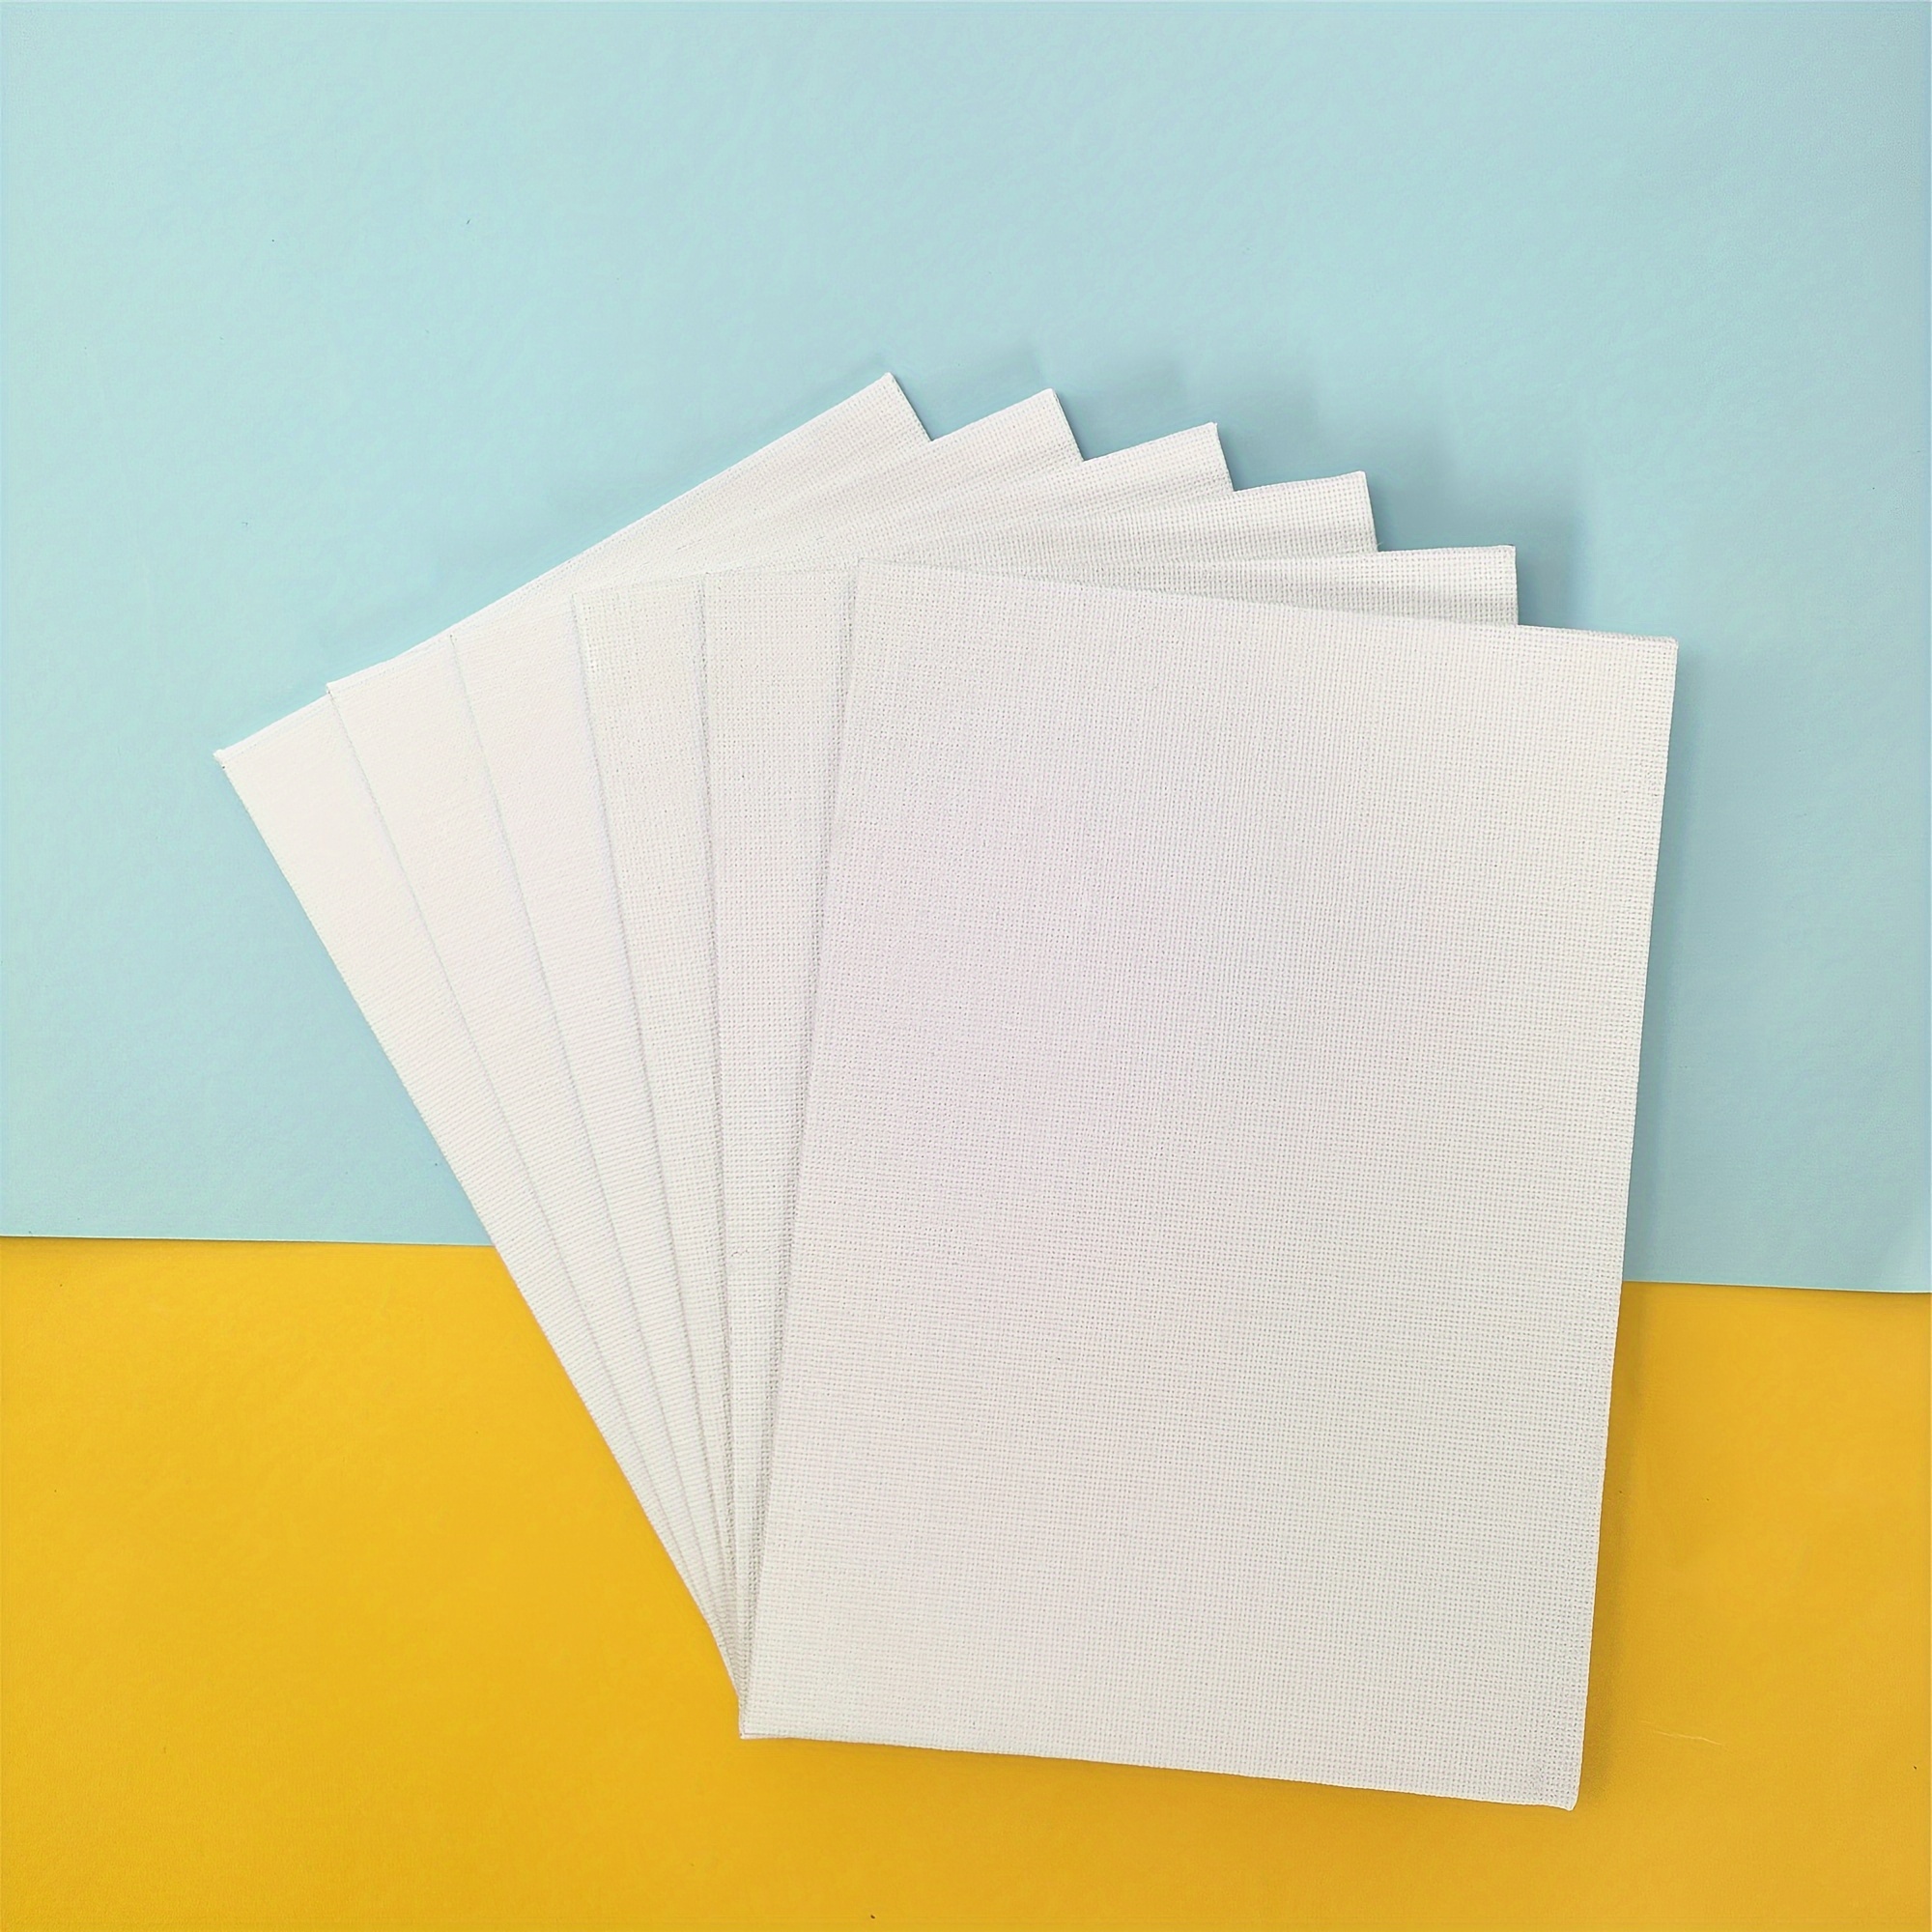  Painting Canvas Panels 5x7 Inch, 24 Bulk Pack - 8 Oz Triple  d 100% Cotton Acid Free Canvases For Painting, White Blank Flat Canvas  Boards For Acrylic, Oil, Watercolor & Tempera Paints